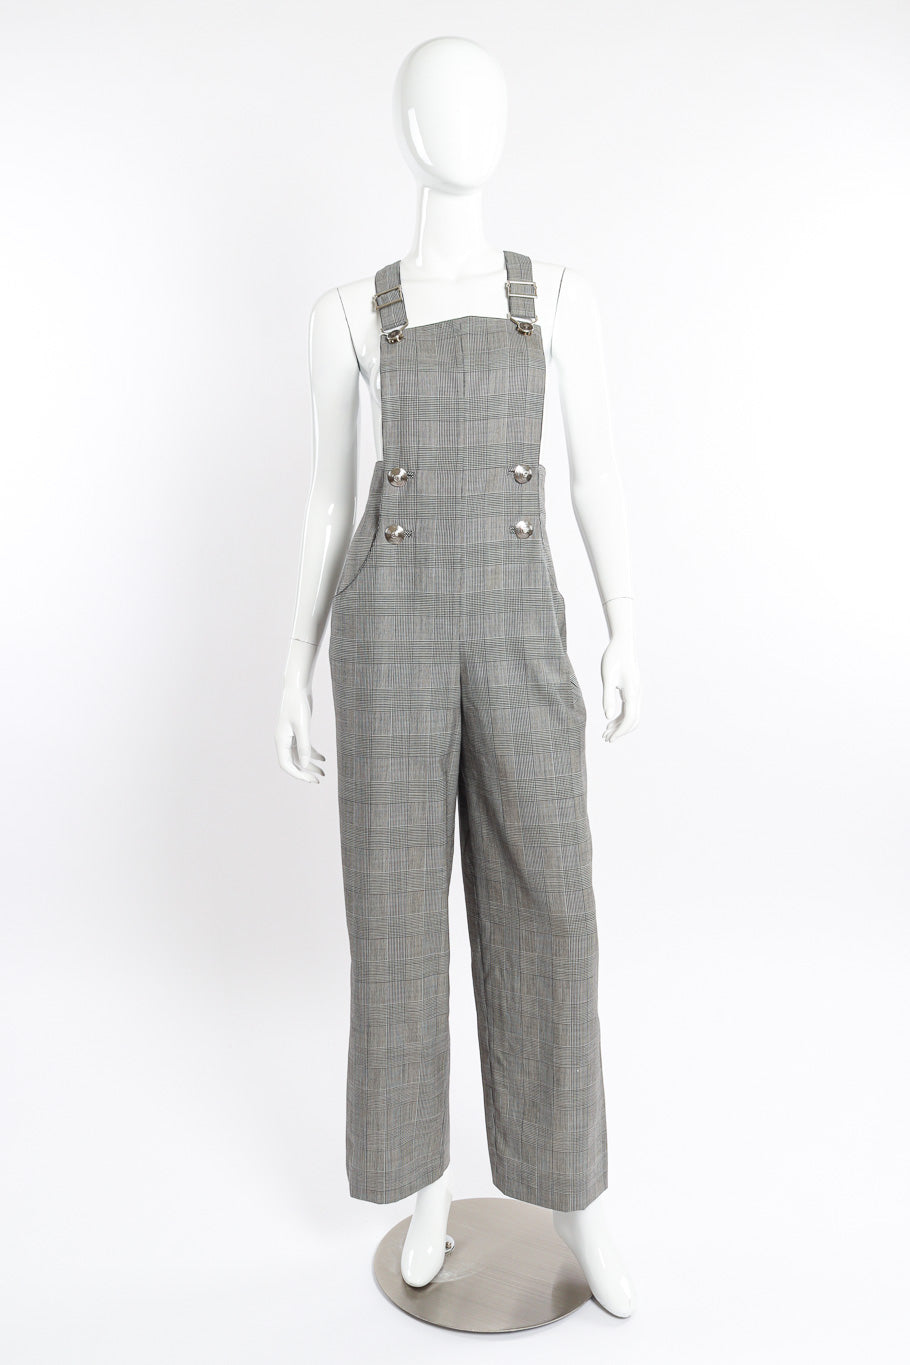 Houndstooth Overall Jumpsuit by Gianni Versace on mannequin @recessla